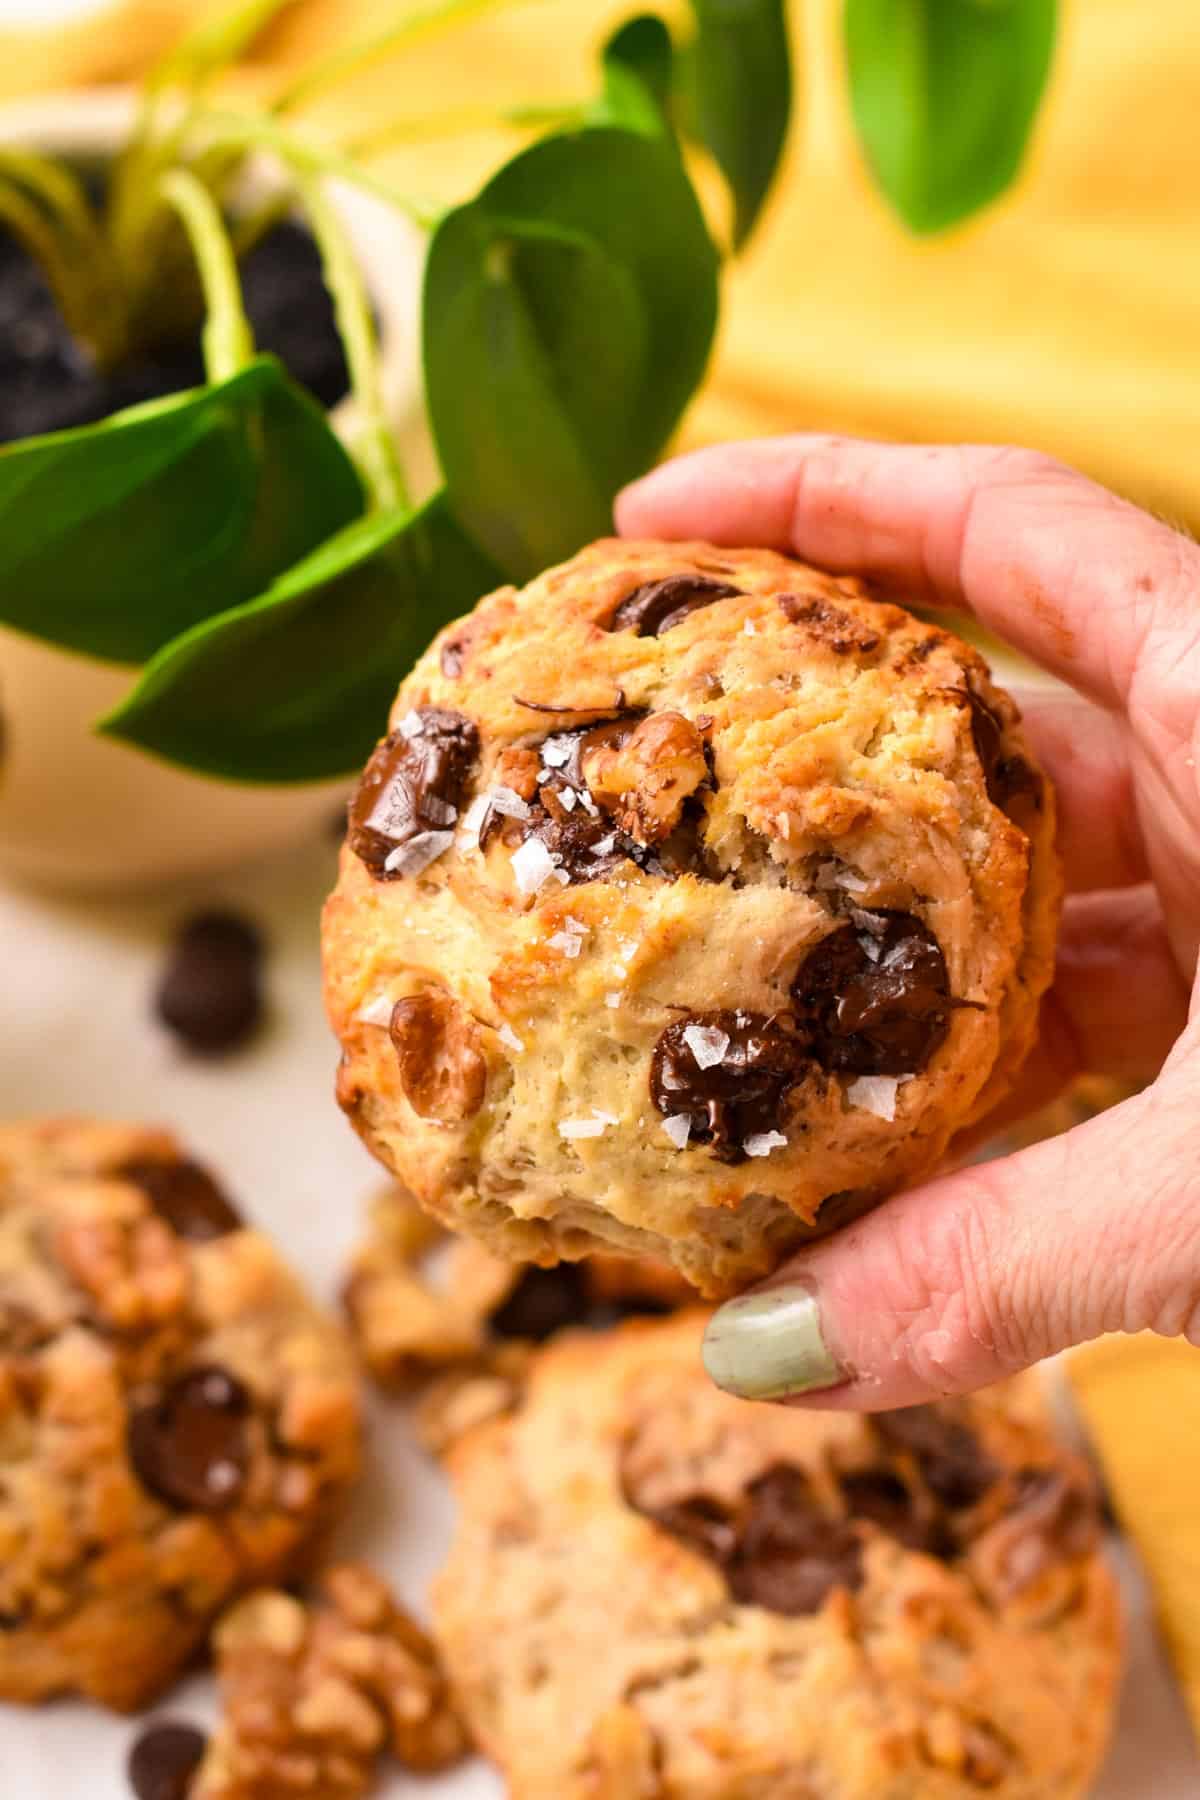 a hand holding a large thick banana cookies with walnuts and chocolate chips and flaky salt.